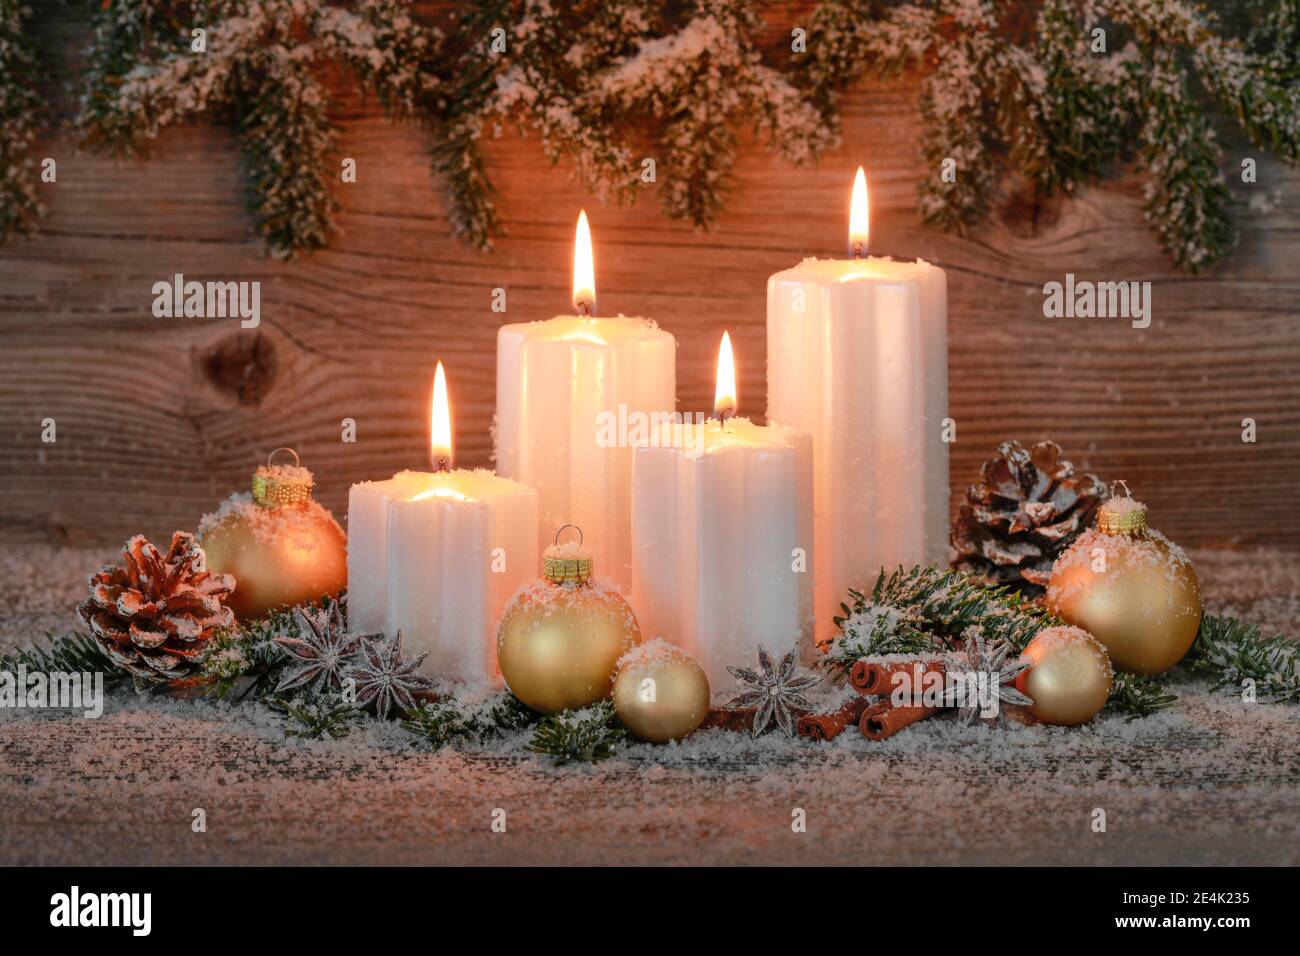 Natural advent decoration with 4 burning candles Stock Photo